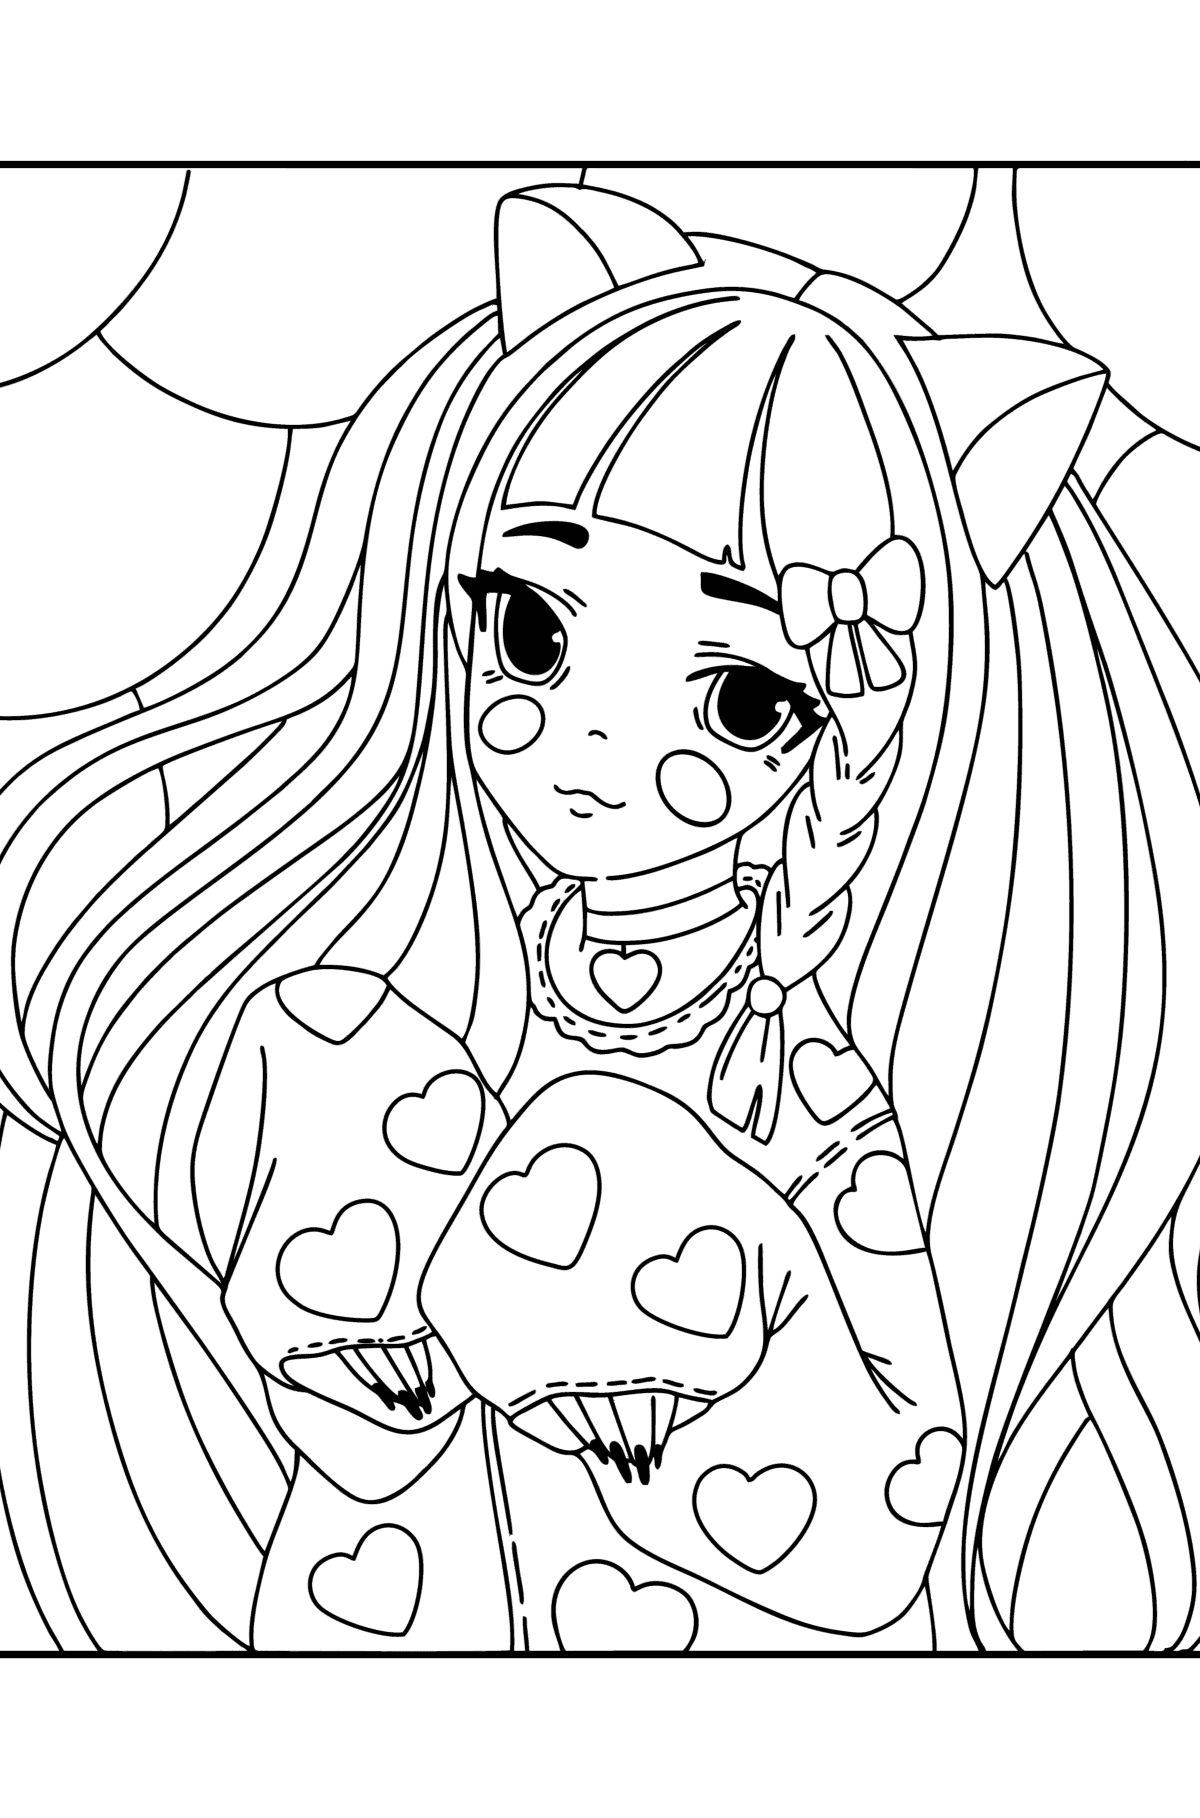 Cute Girl Coloring Pages  Pluscoloringcom